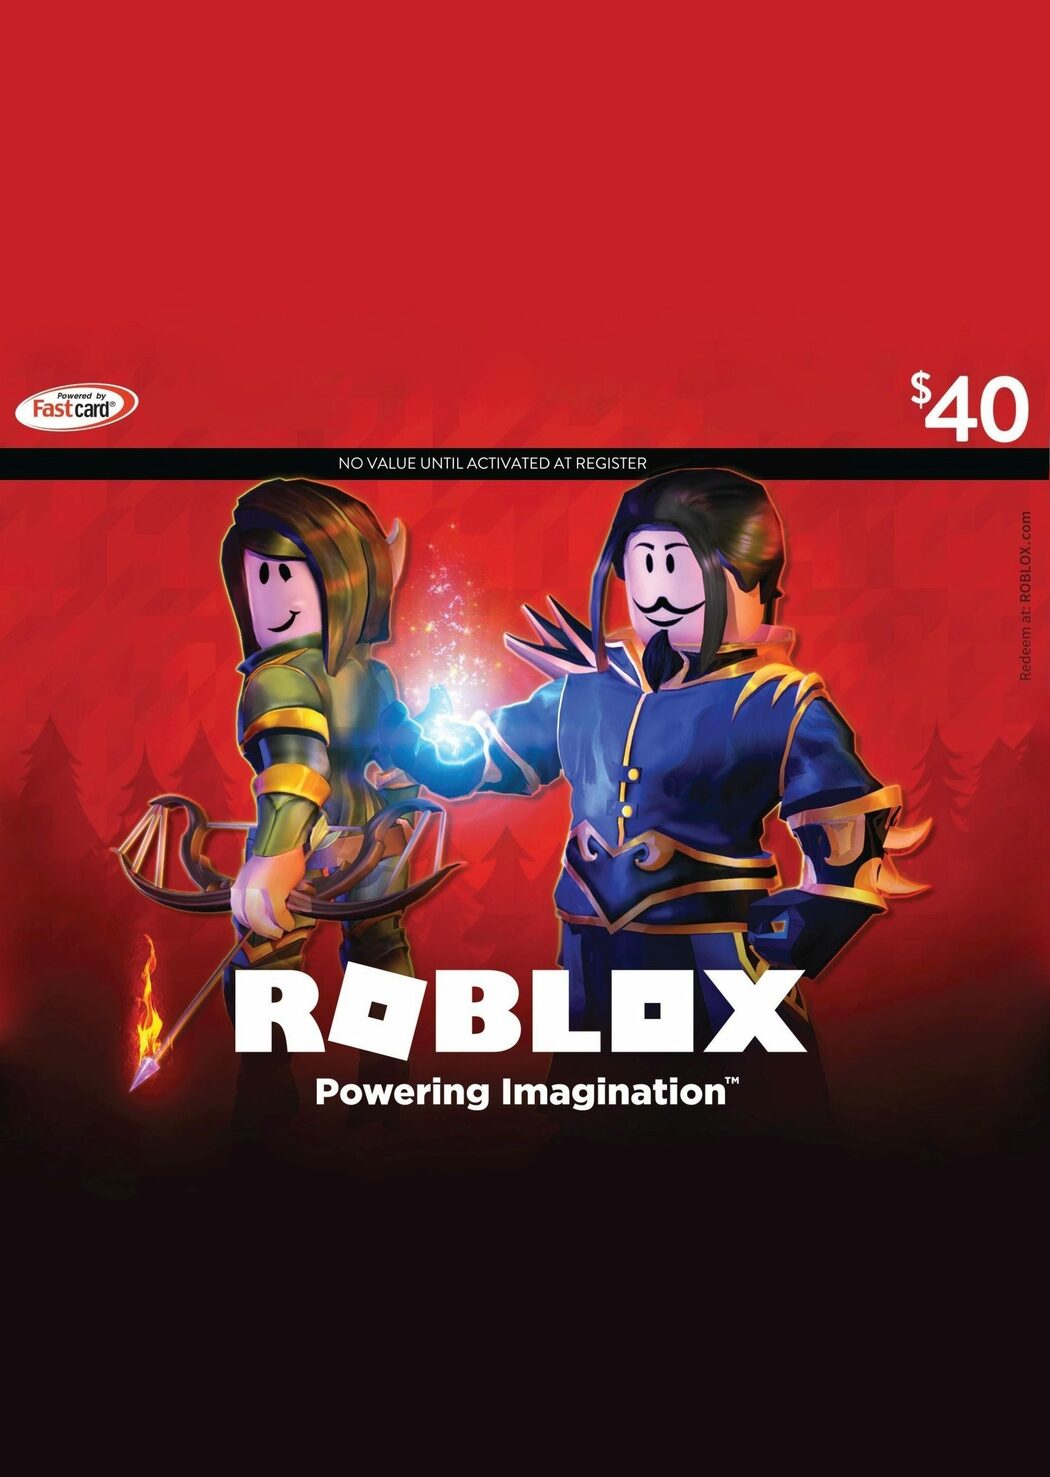 Get Robux Cash Cheap Roblox Robux Card 40 Usd Eneba - roblox cards that haven't been used